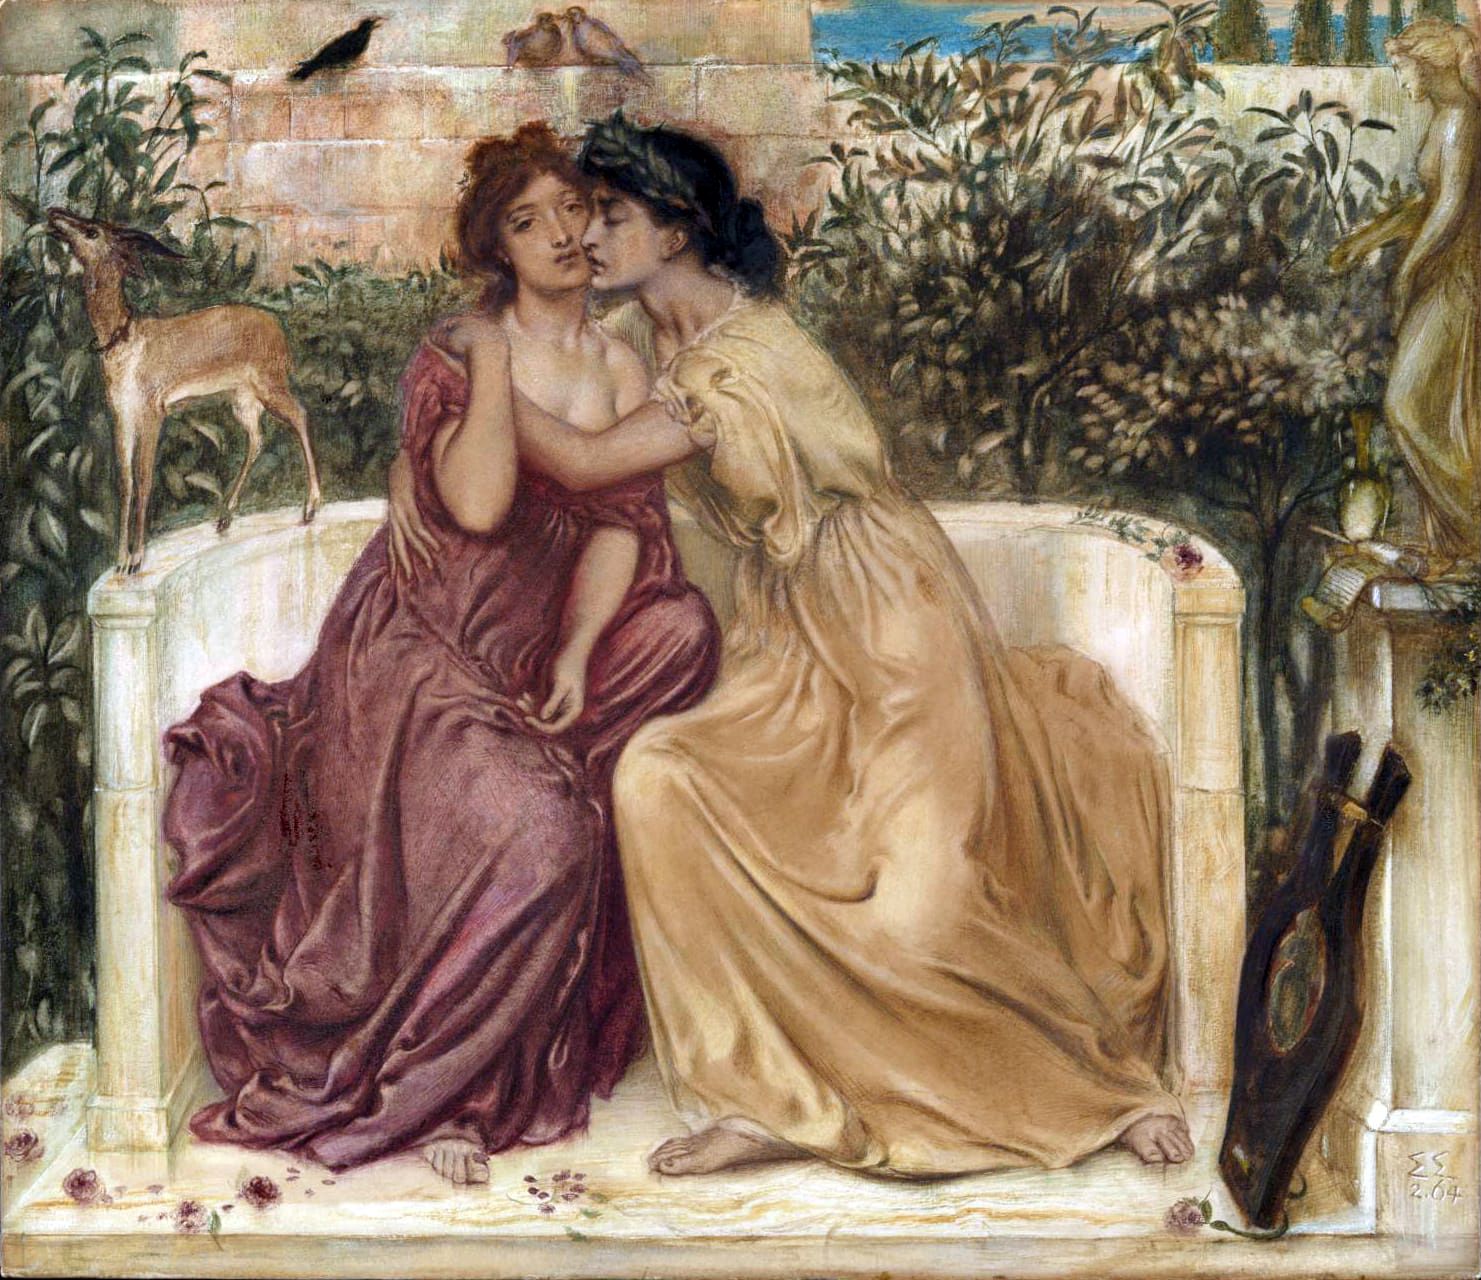 Two young women embracing.